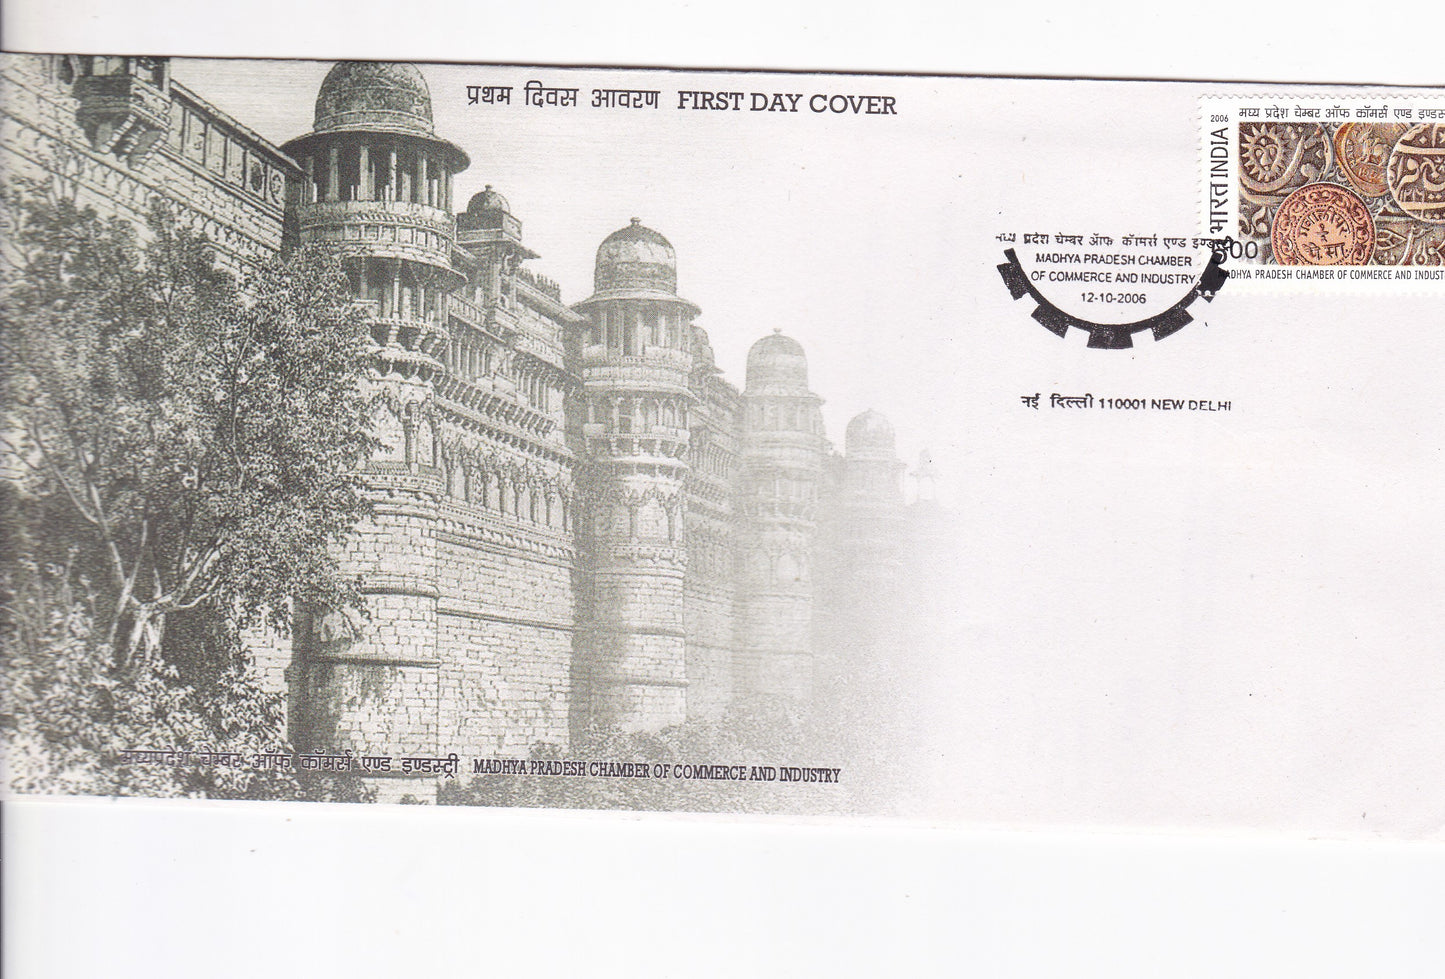 India-MadhyaPradesh chamber of Commerce and Industry  FDC-2006